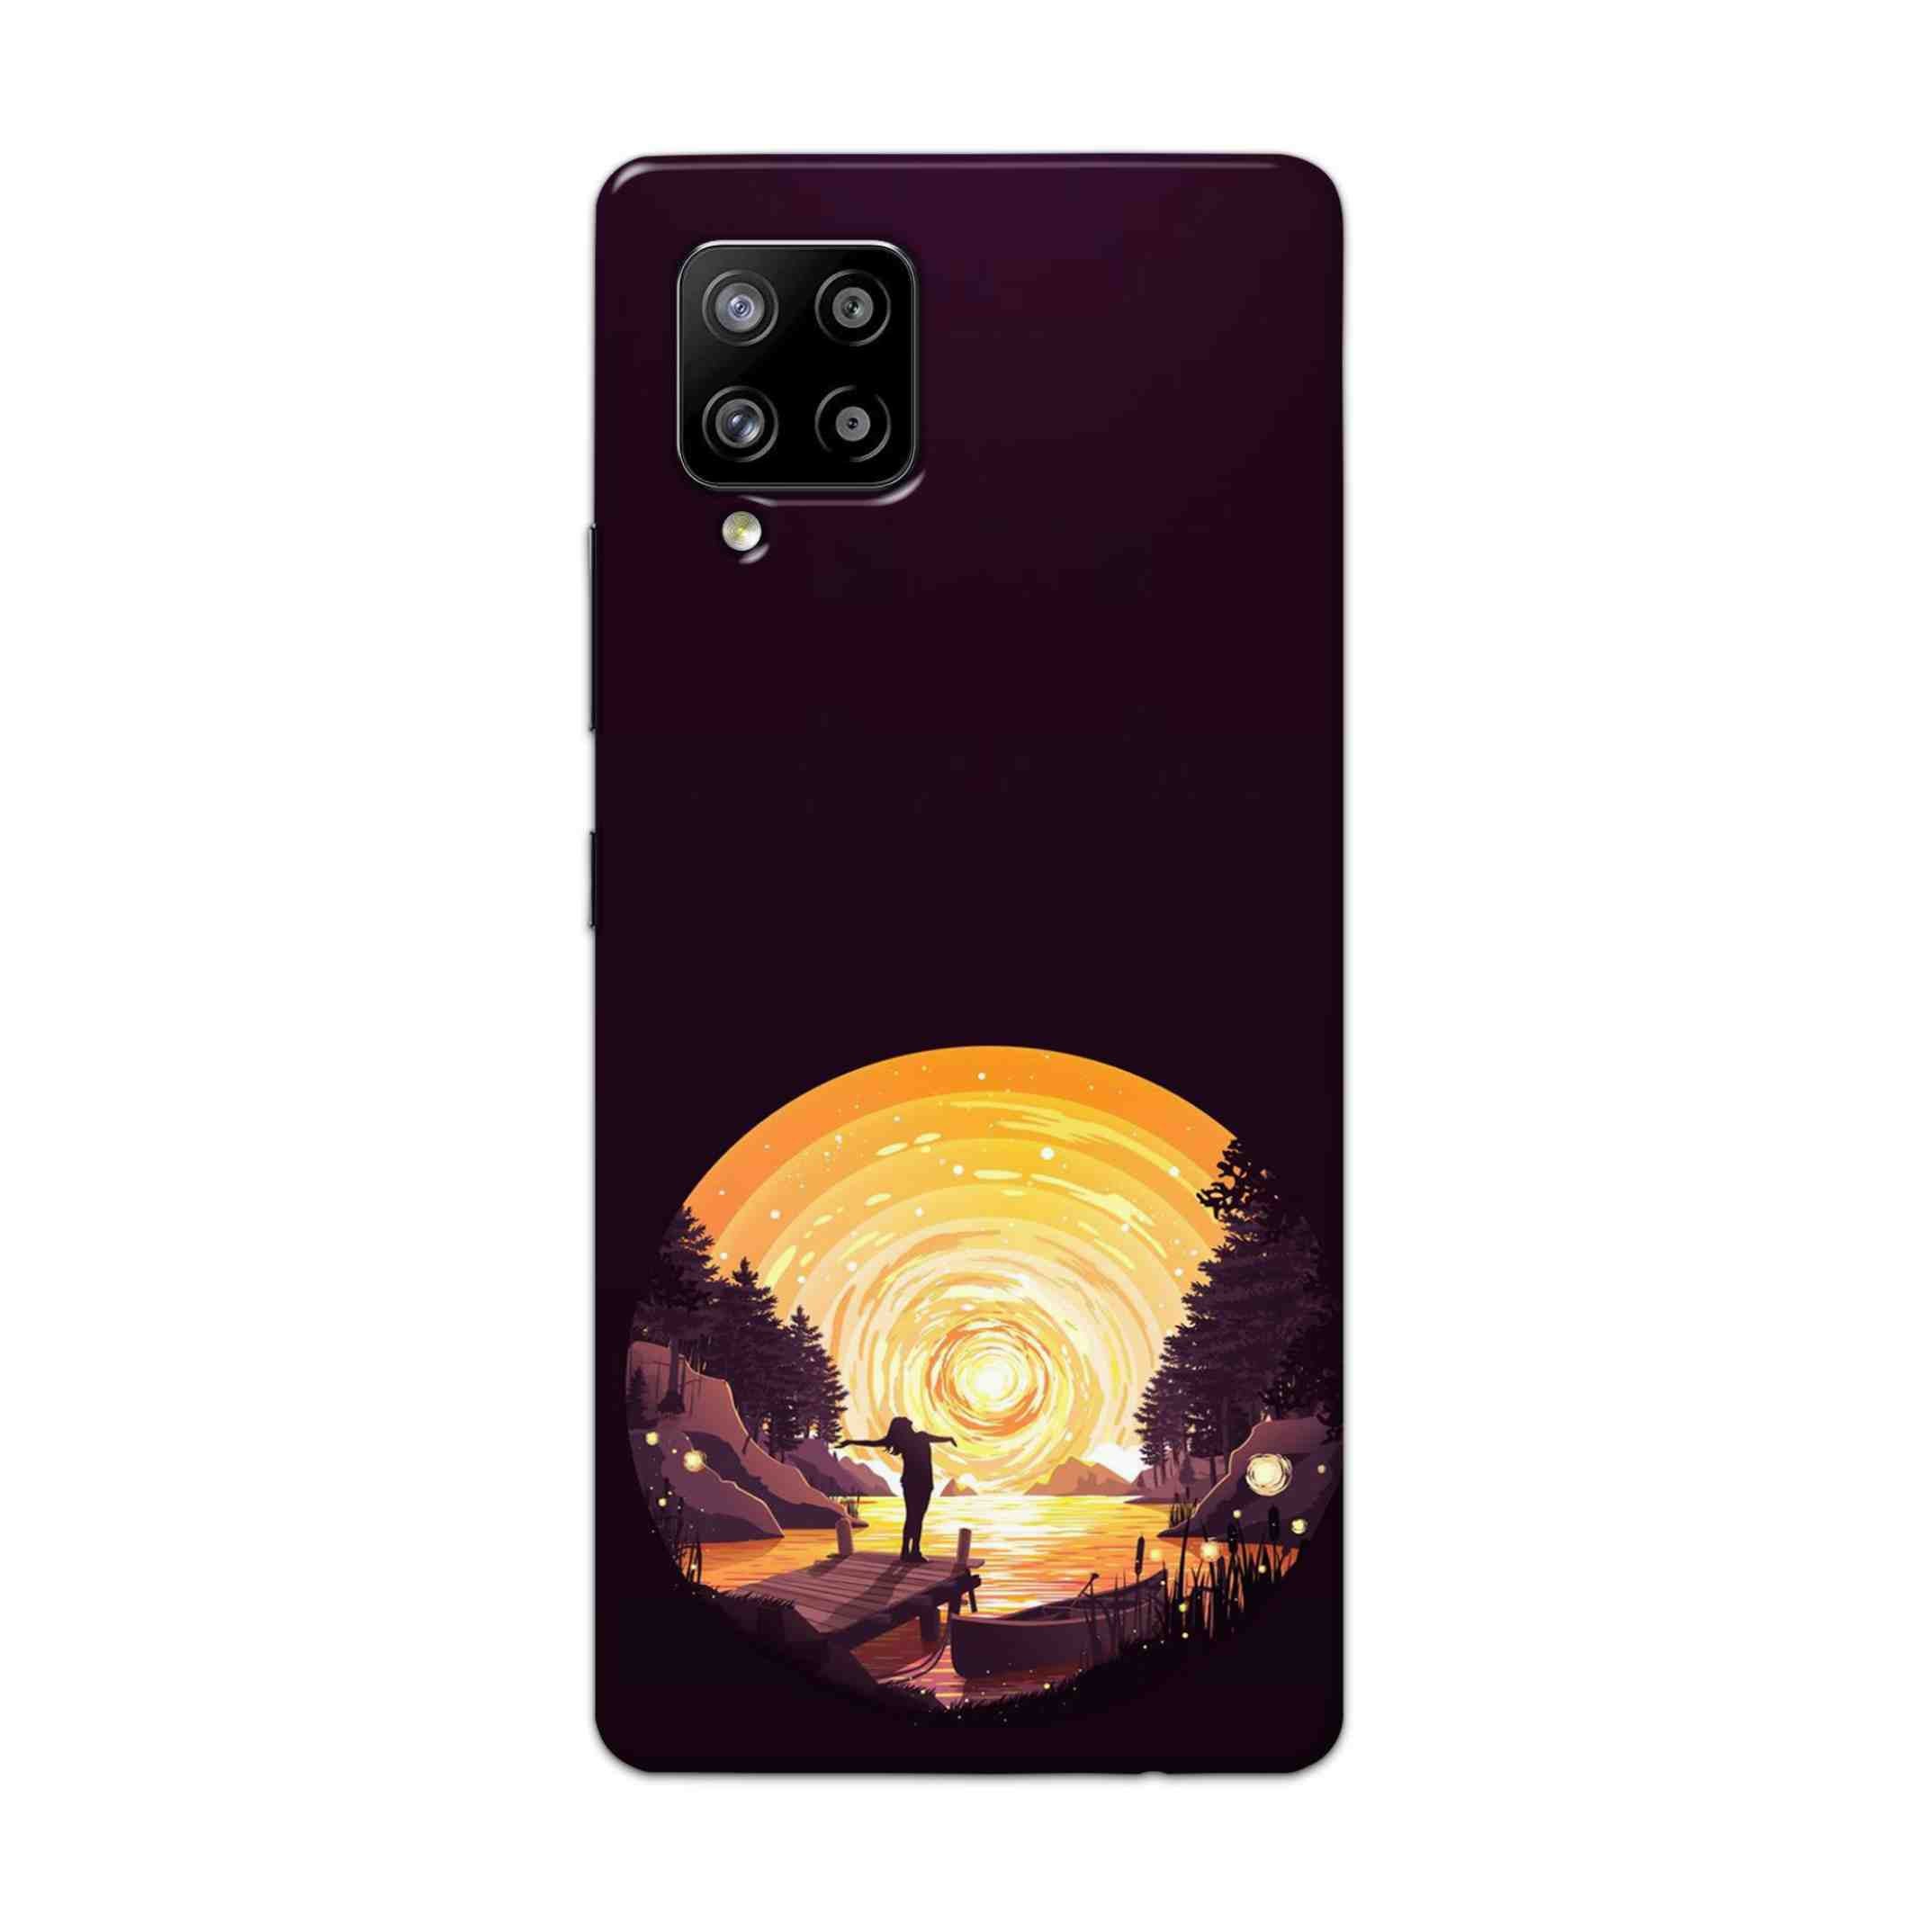 Buy Night Sunrise Hard Back Mobile Phone Case Cover For Samsung Galaxy M42 Online